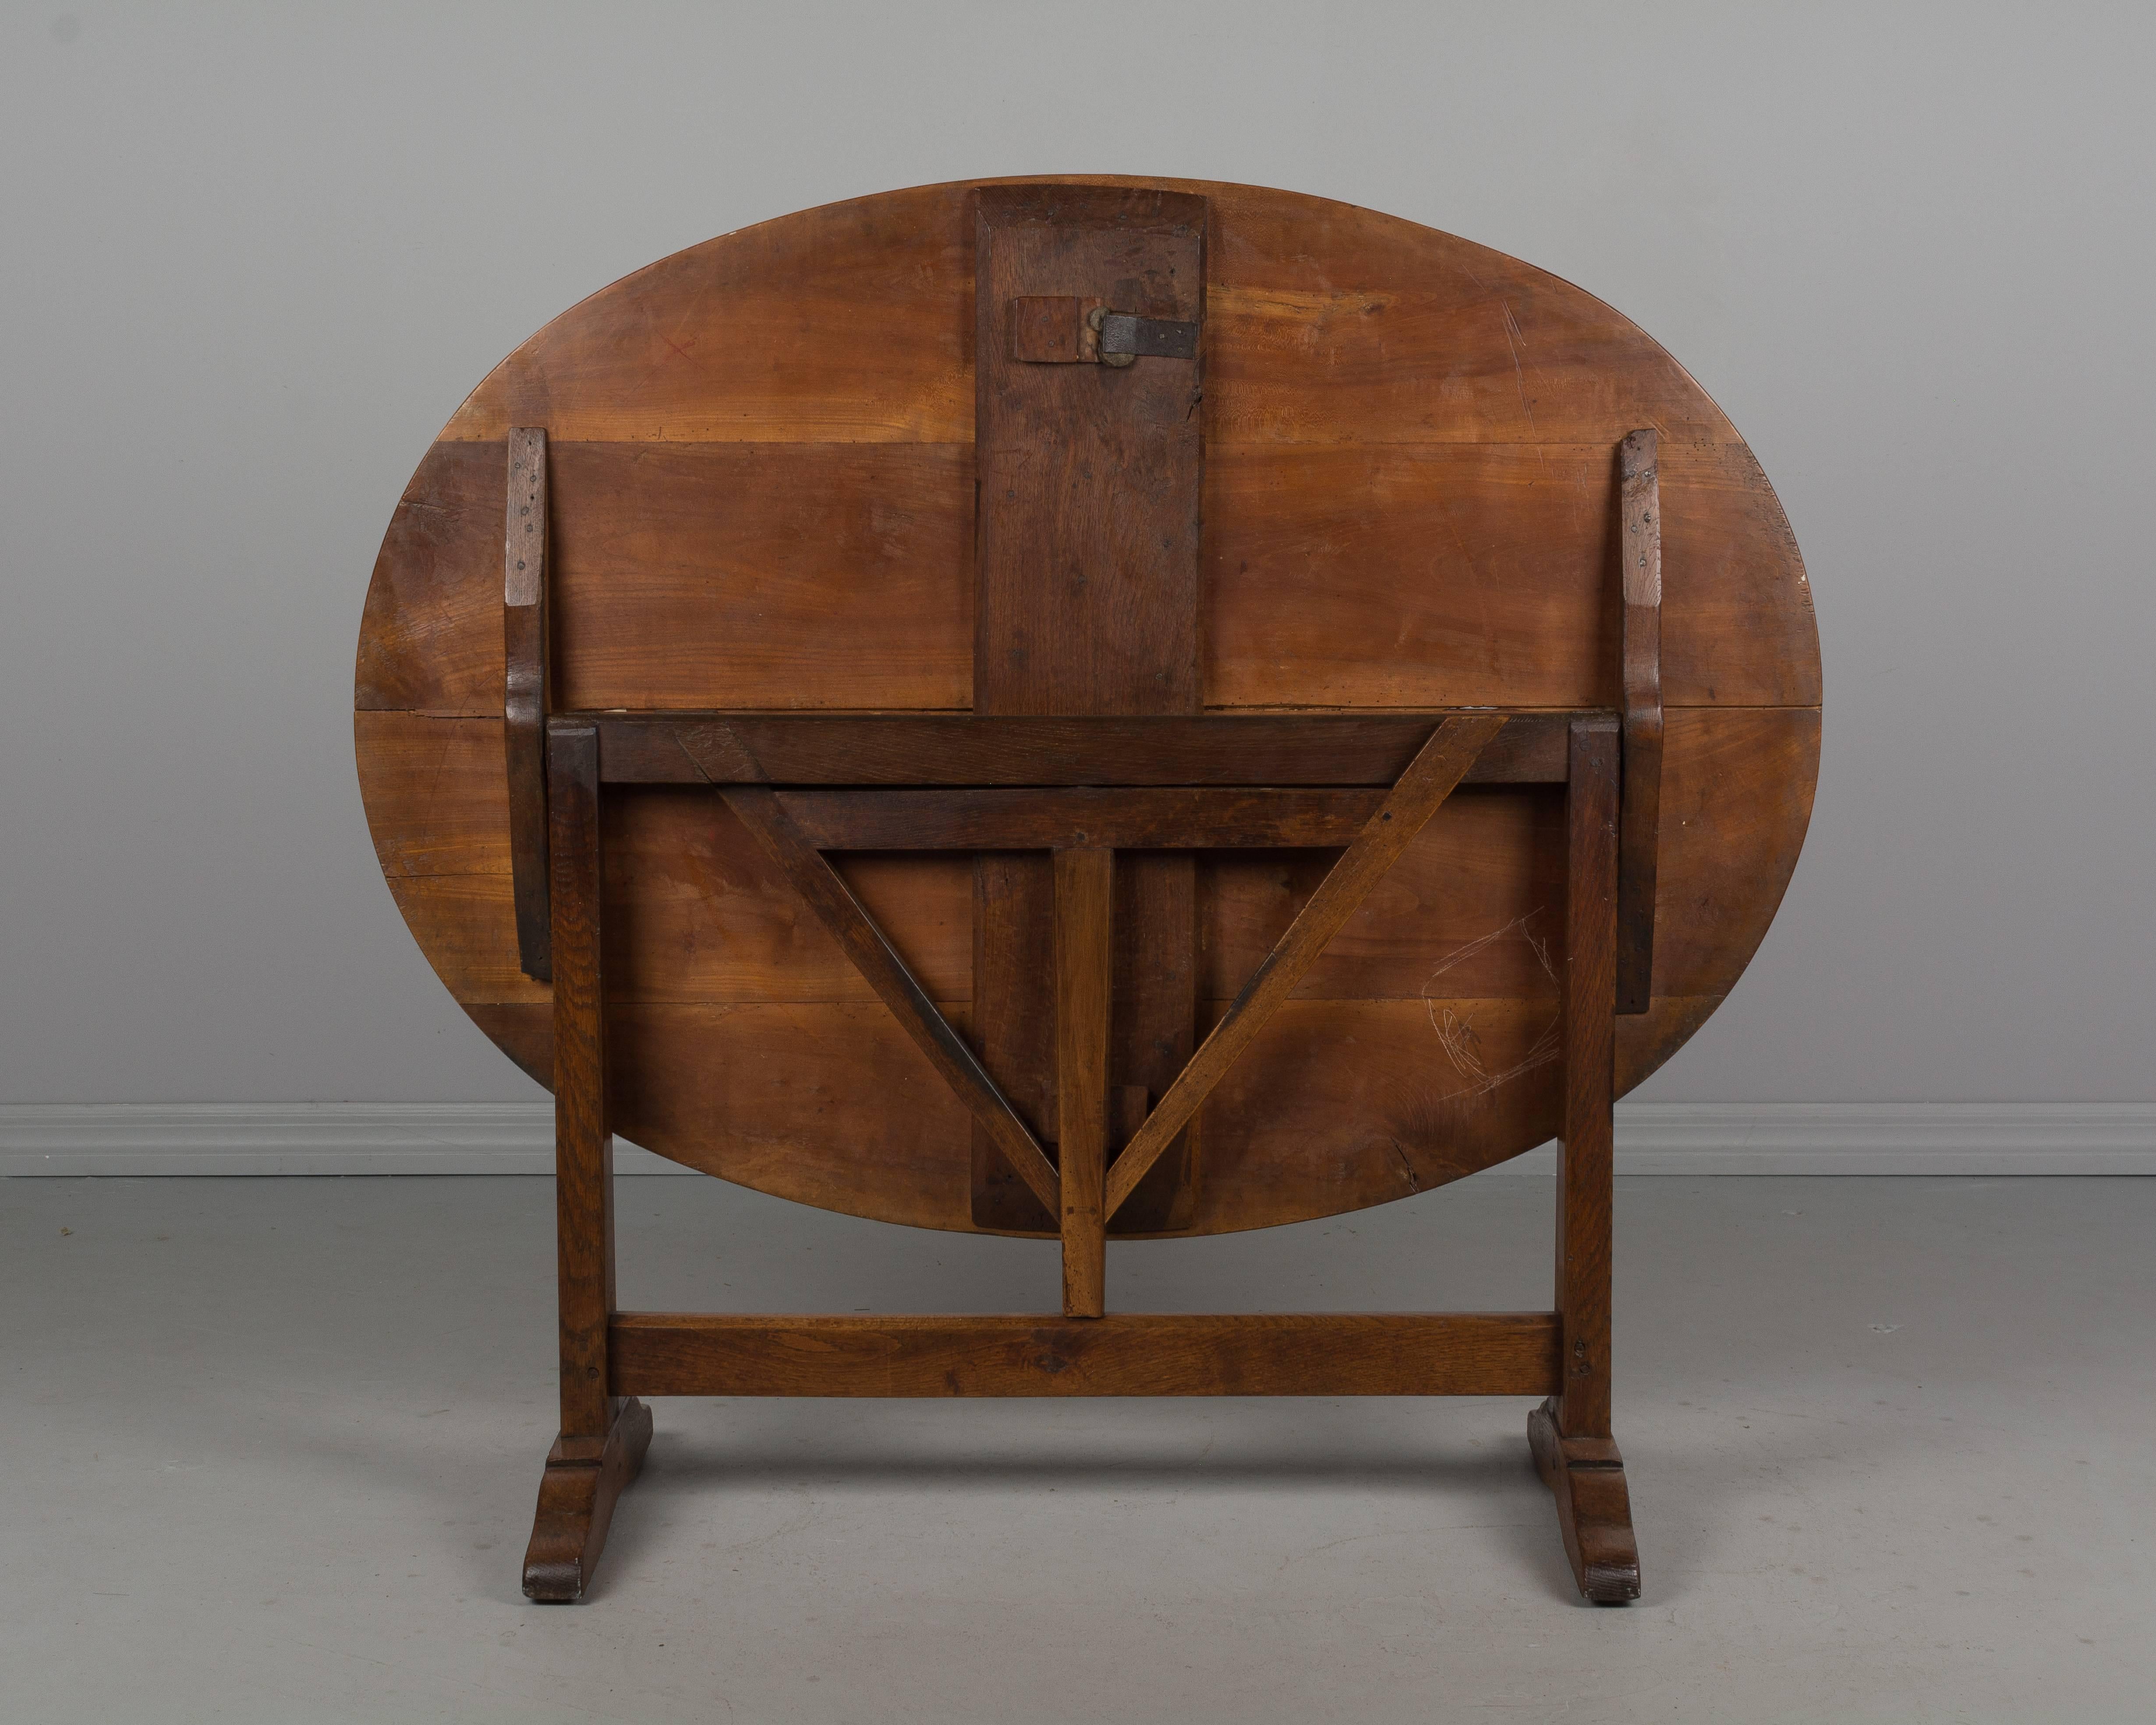 Hand-Crafted 19th Century French Tilt-Top Oval Table or Wine Tasting Table